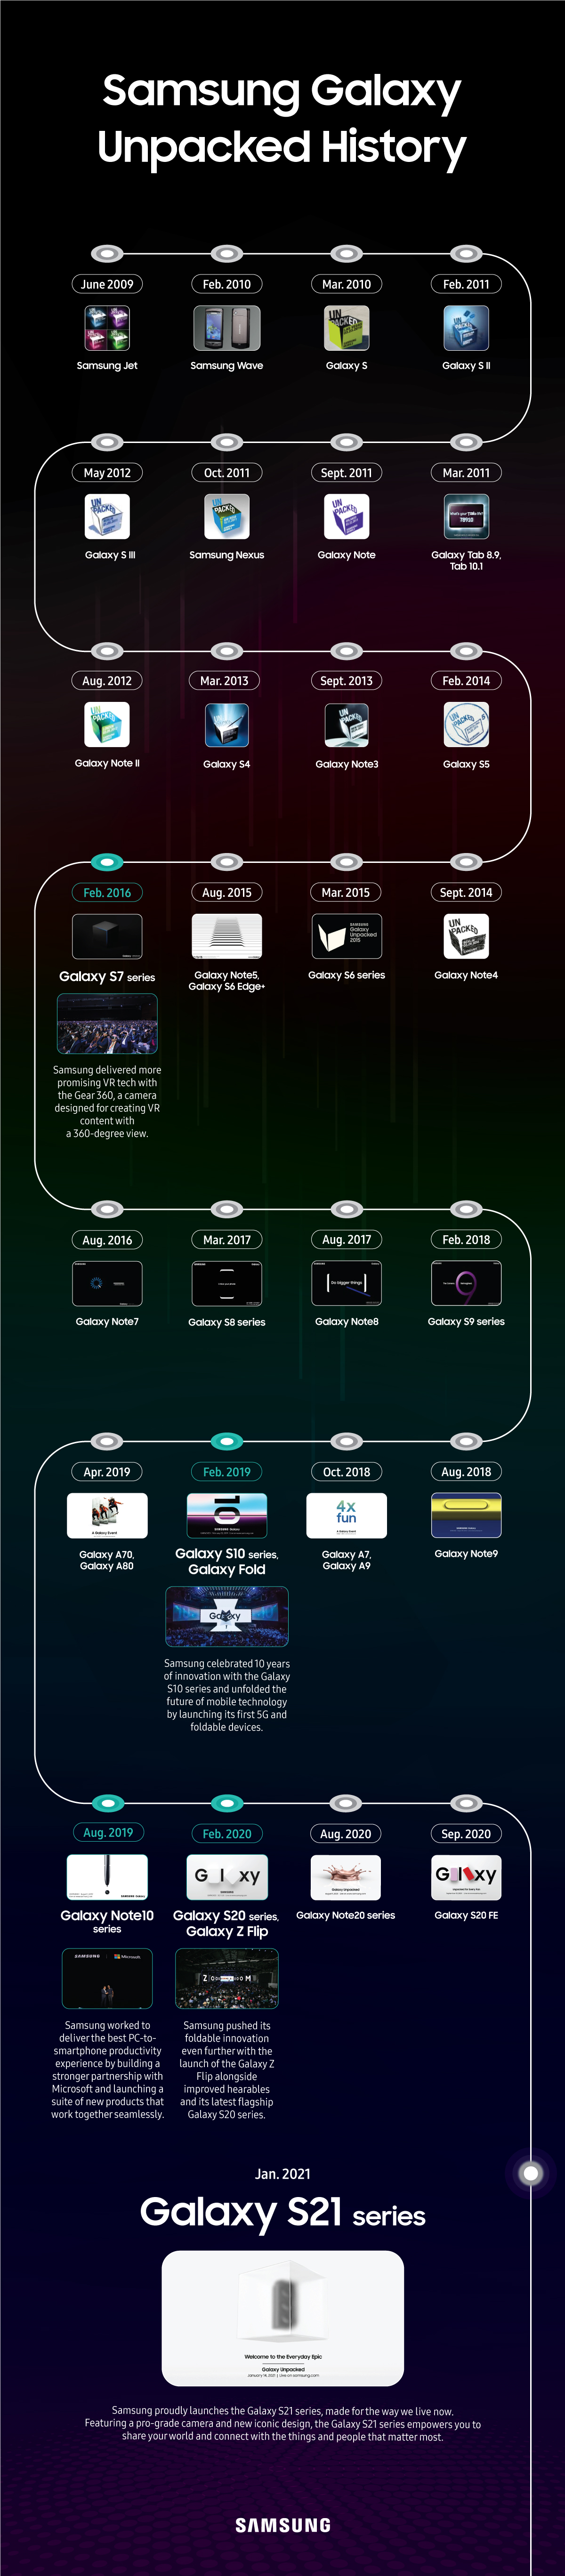 Infographic showing Samsung unpacked event so far from the beginning